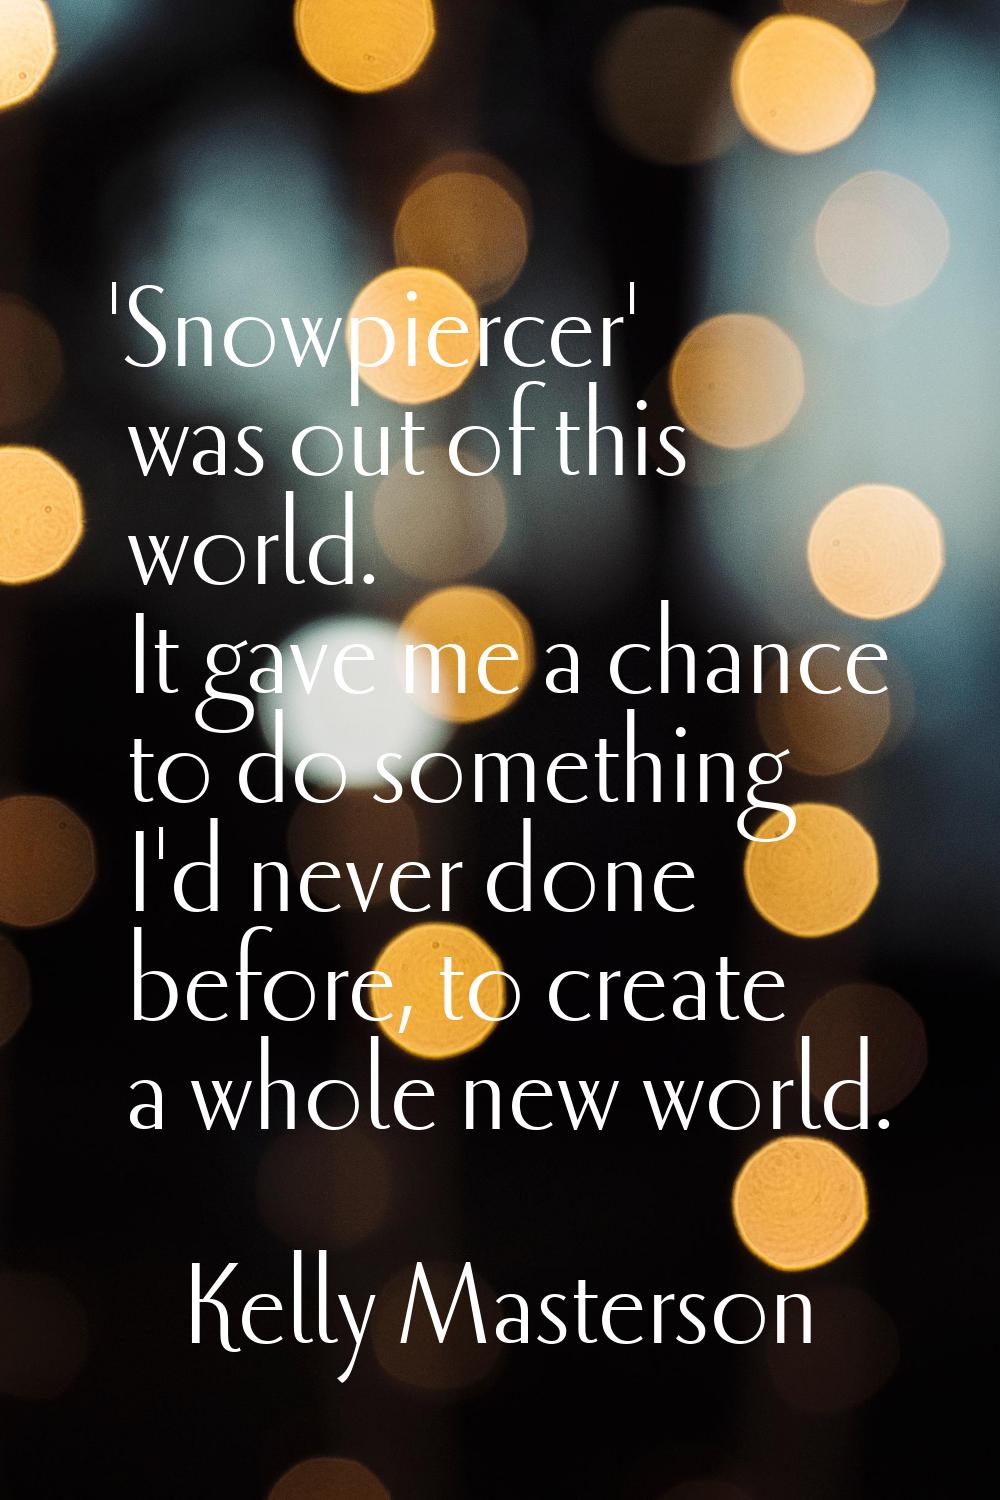 'Snowpiercer' was out of this world. It gave me a chance to do something I'd never done before, to 